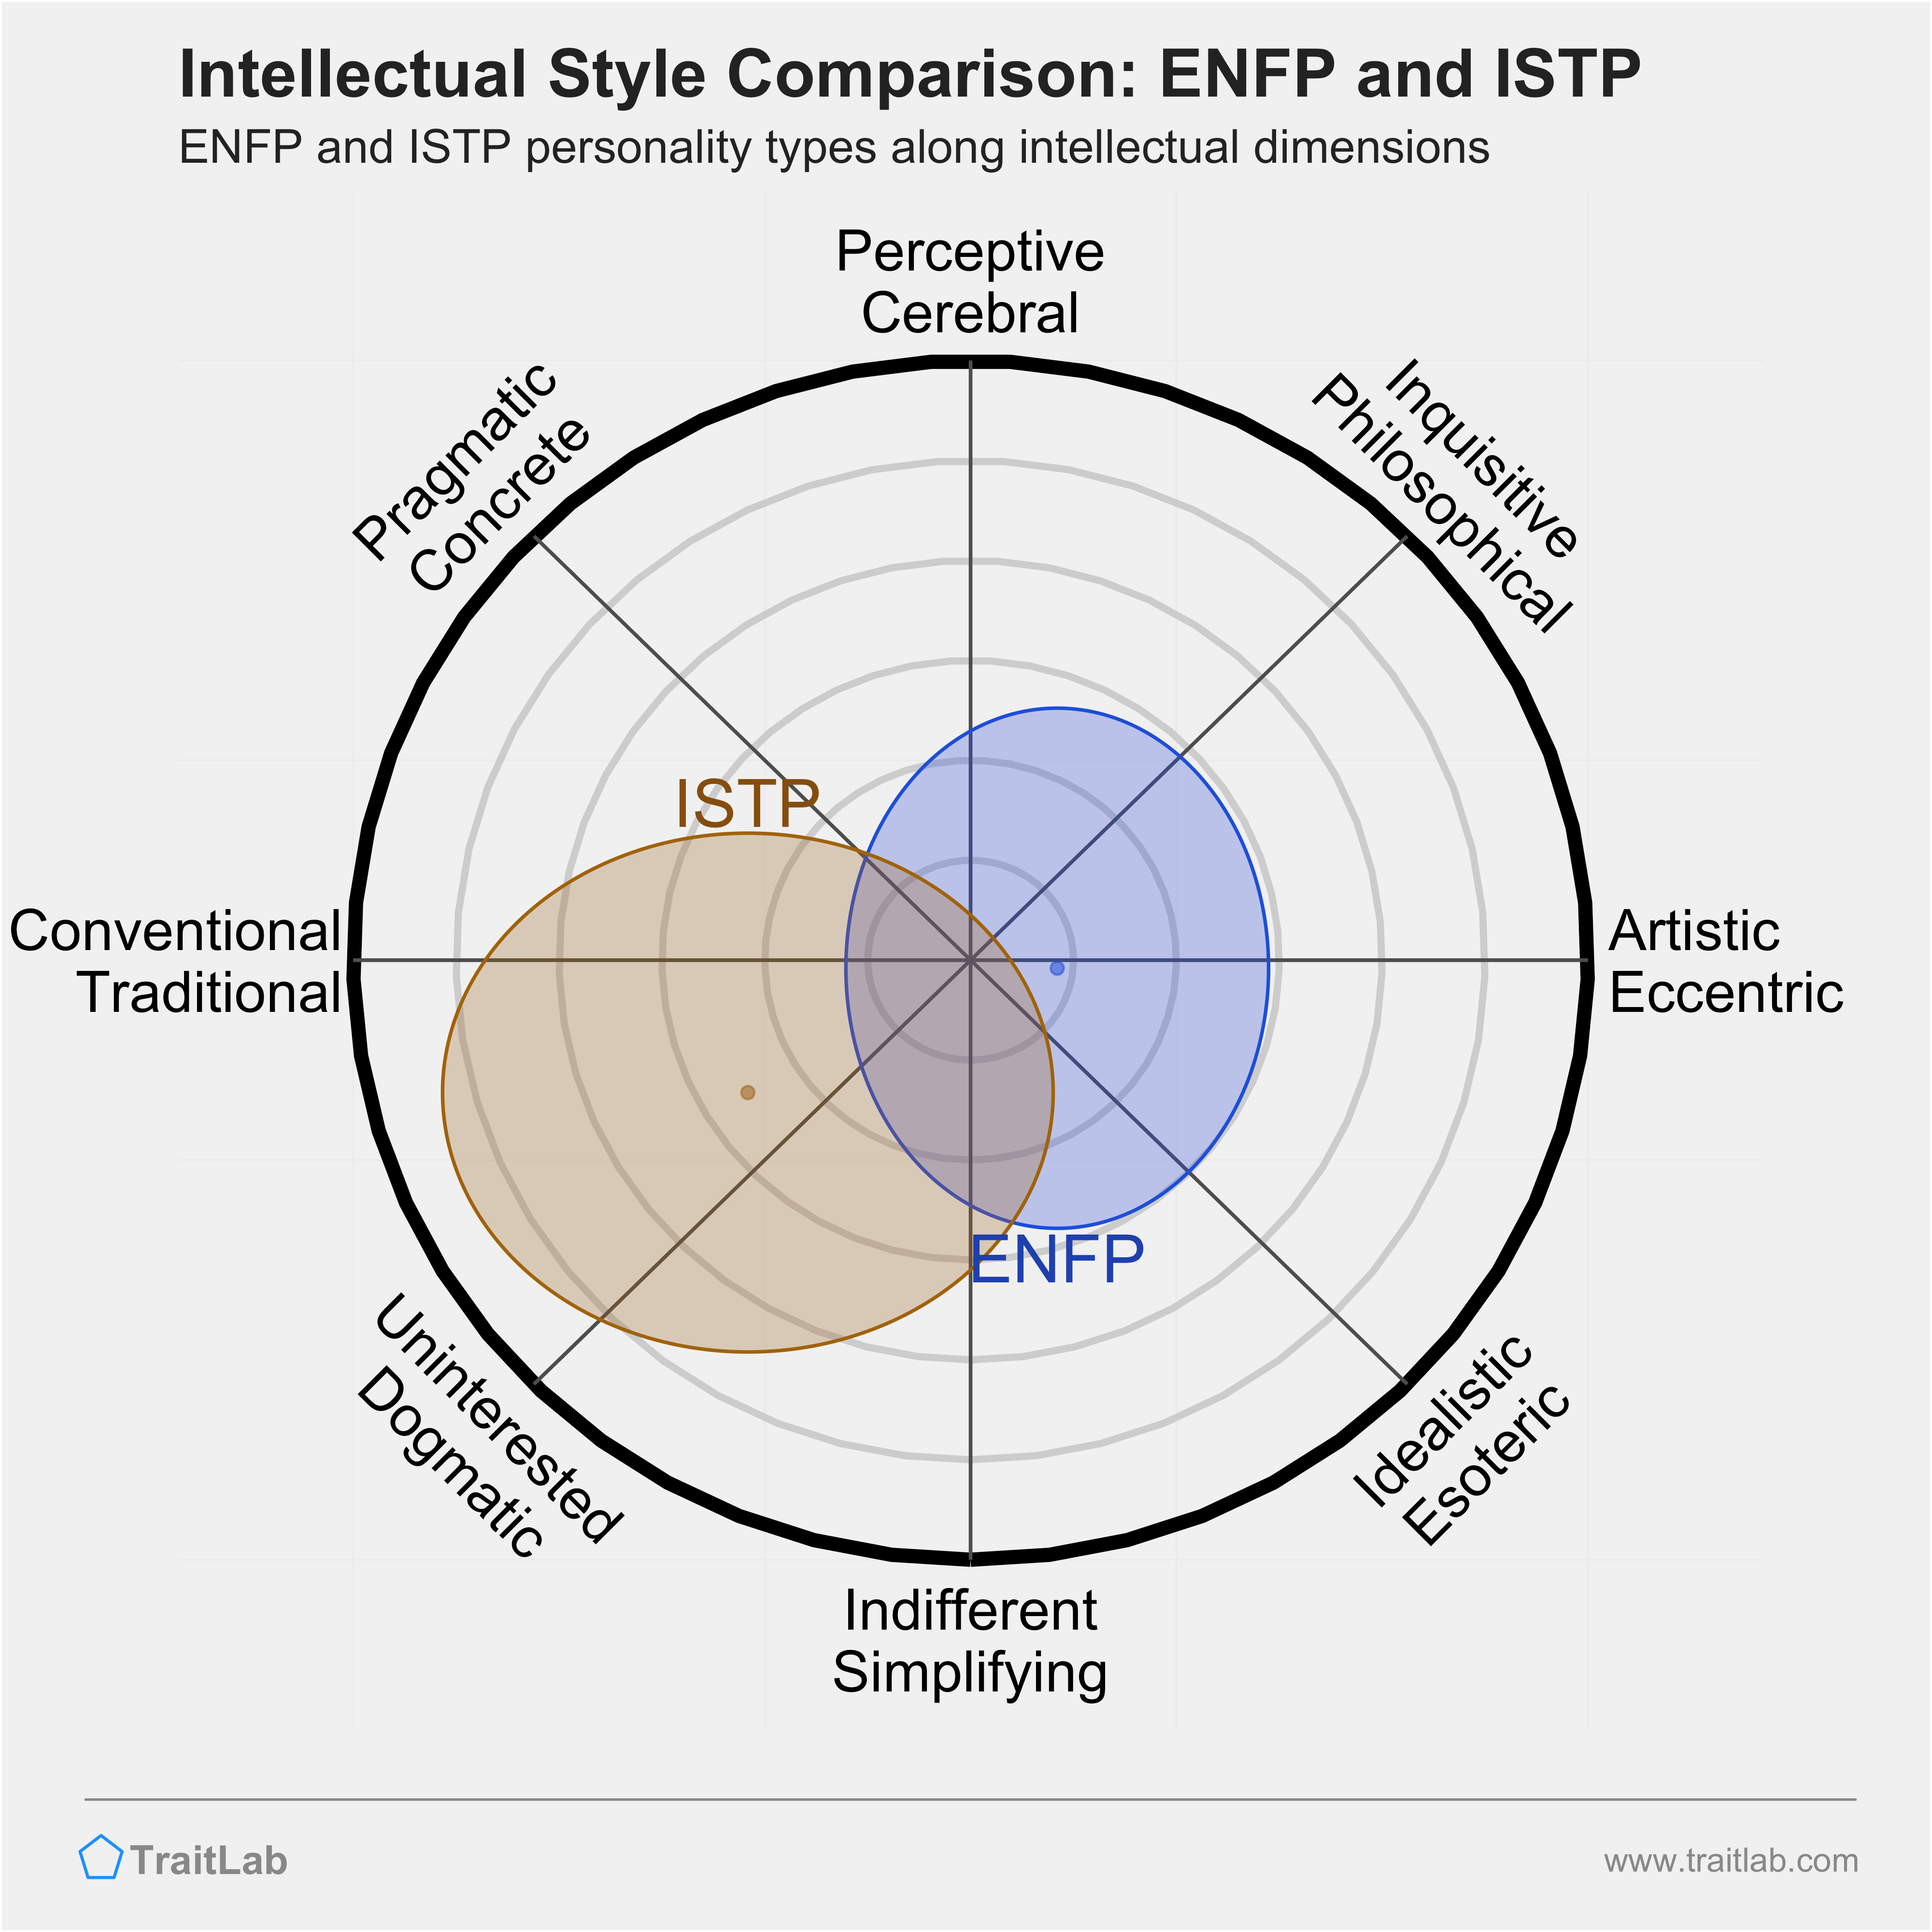 ENFP and ISTP comparison across intellectual dimensions